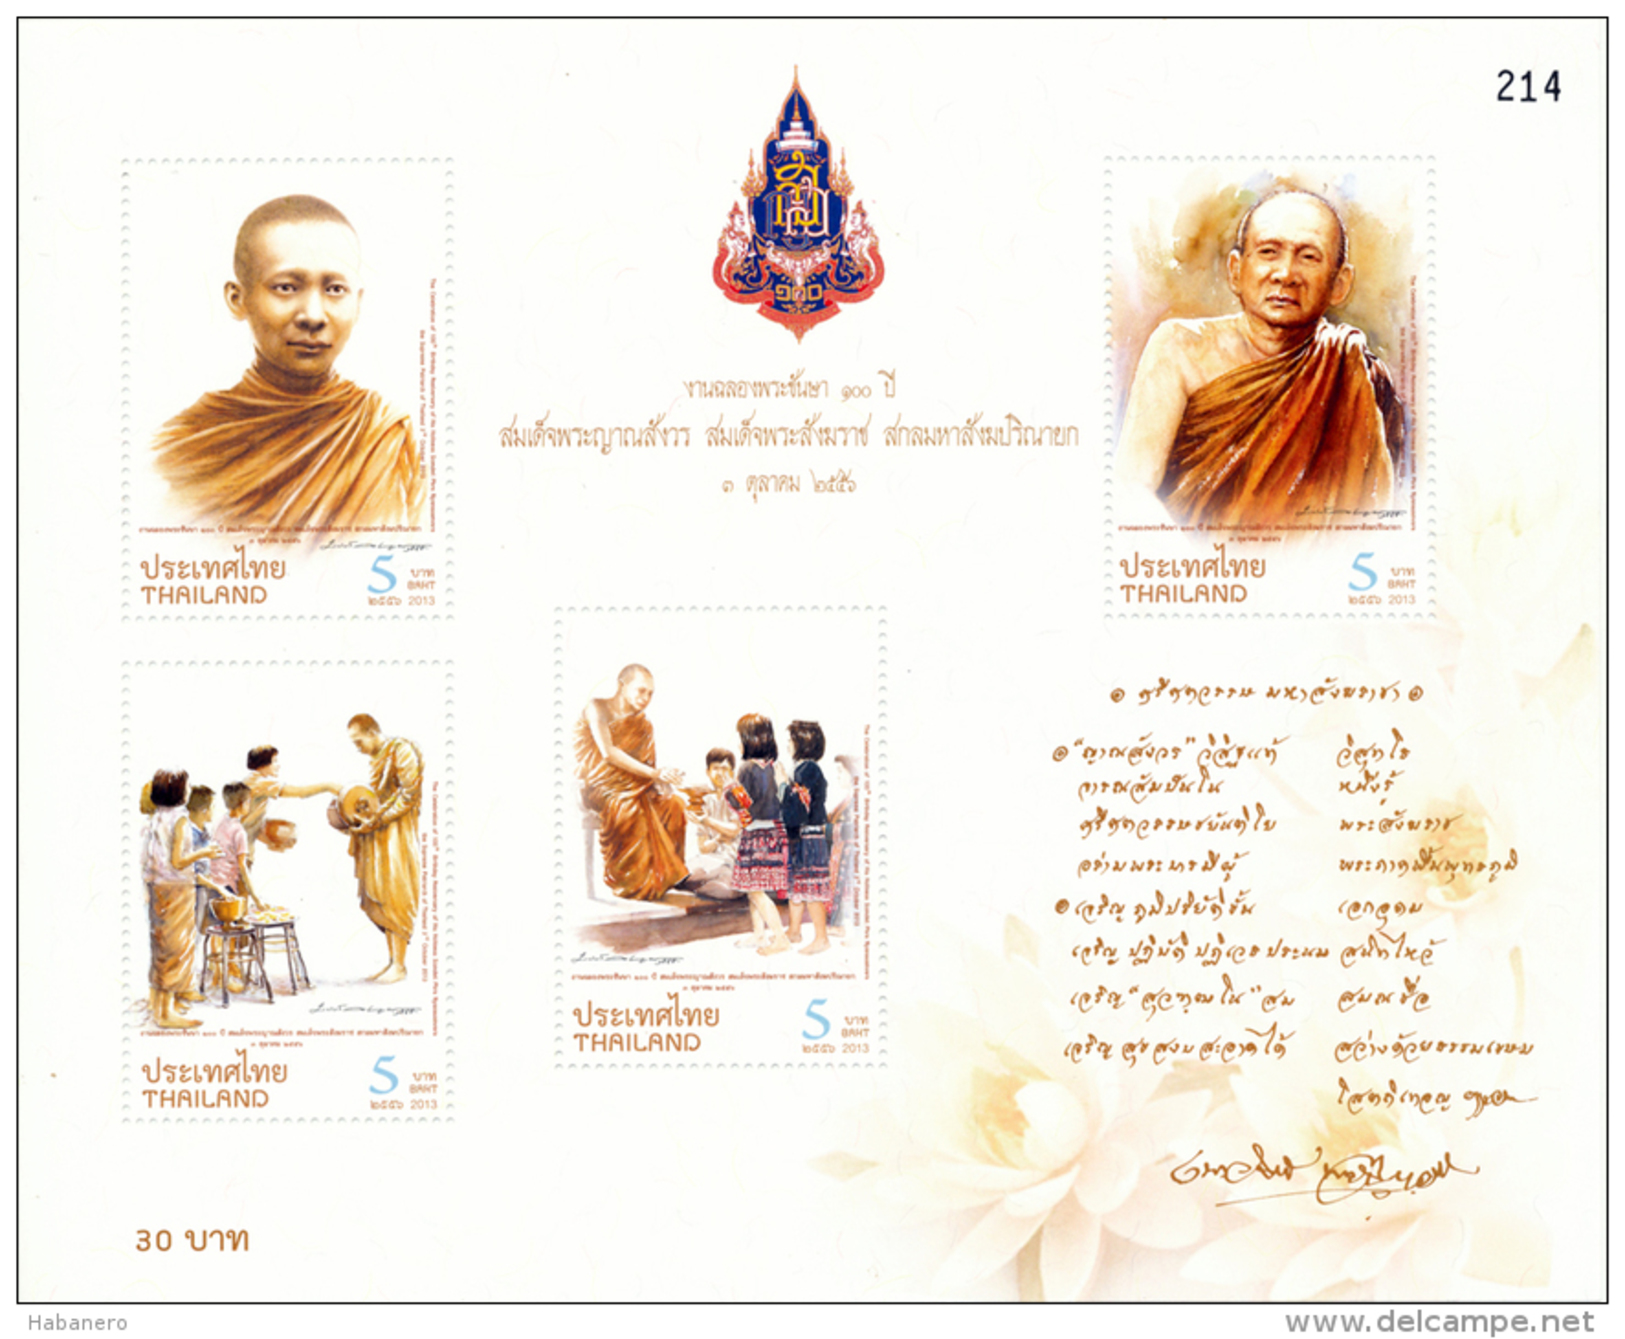 THAILAND - 2013 - Mi BL. 317A - CENTENARY OF THE SUPREME PATRIARCH OF THAILAND - S/S - MNH ** - Thailand